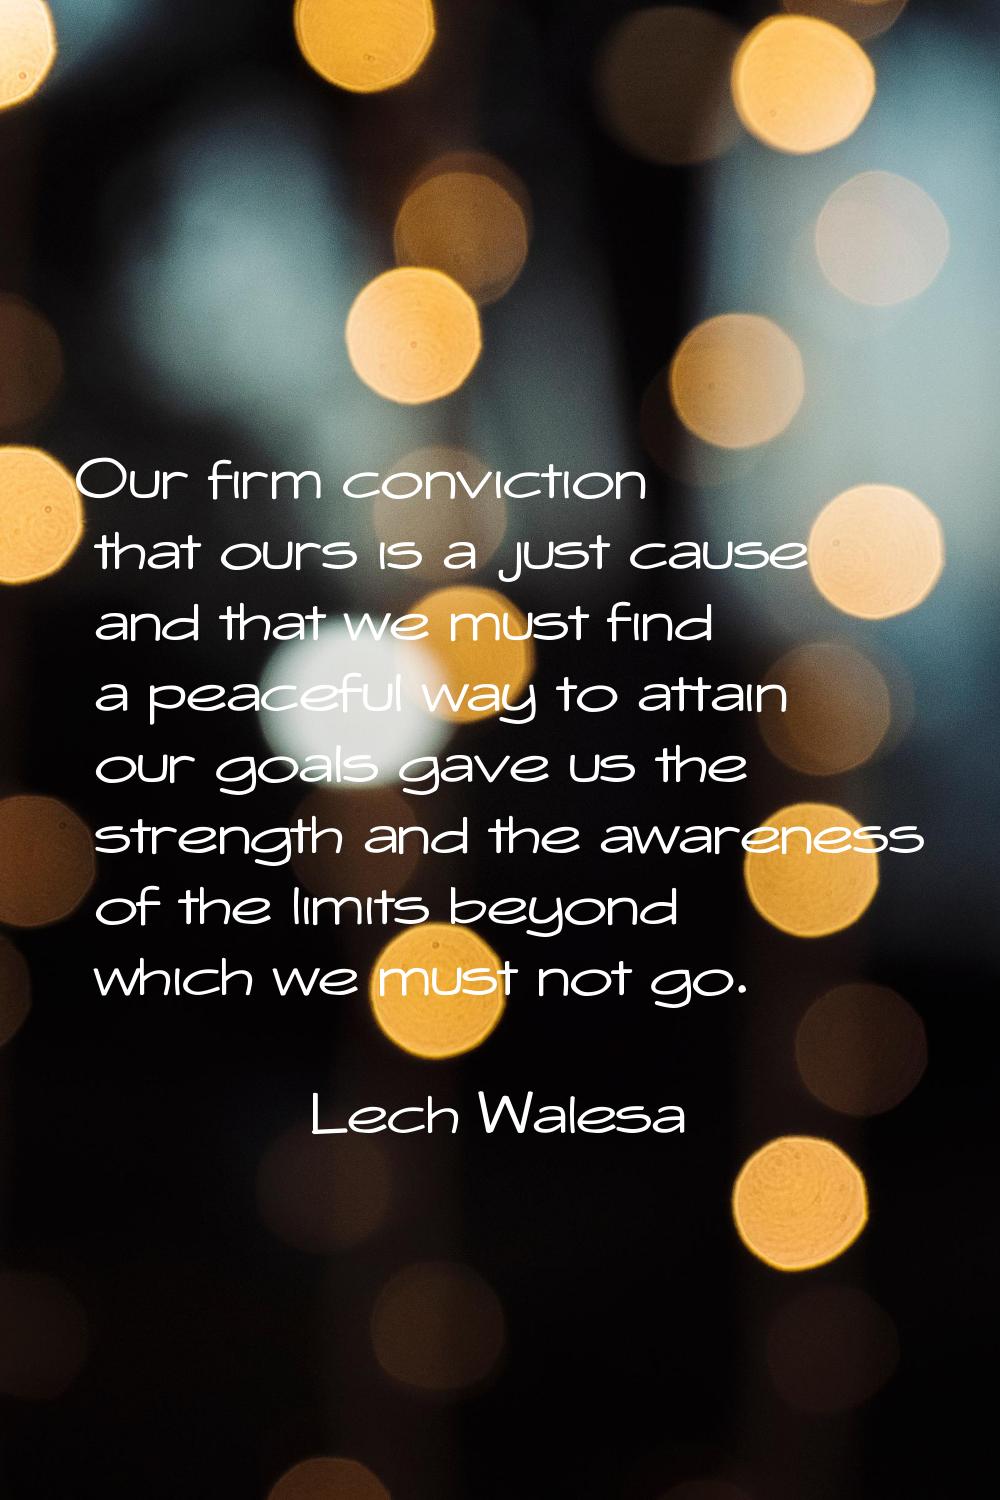 Our firm conviction that ours is a just cause and that we must find a peaceful way to attain our go